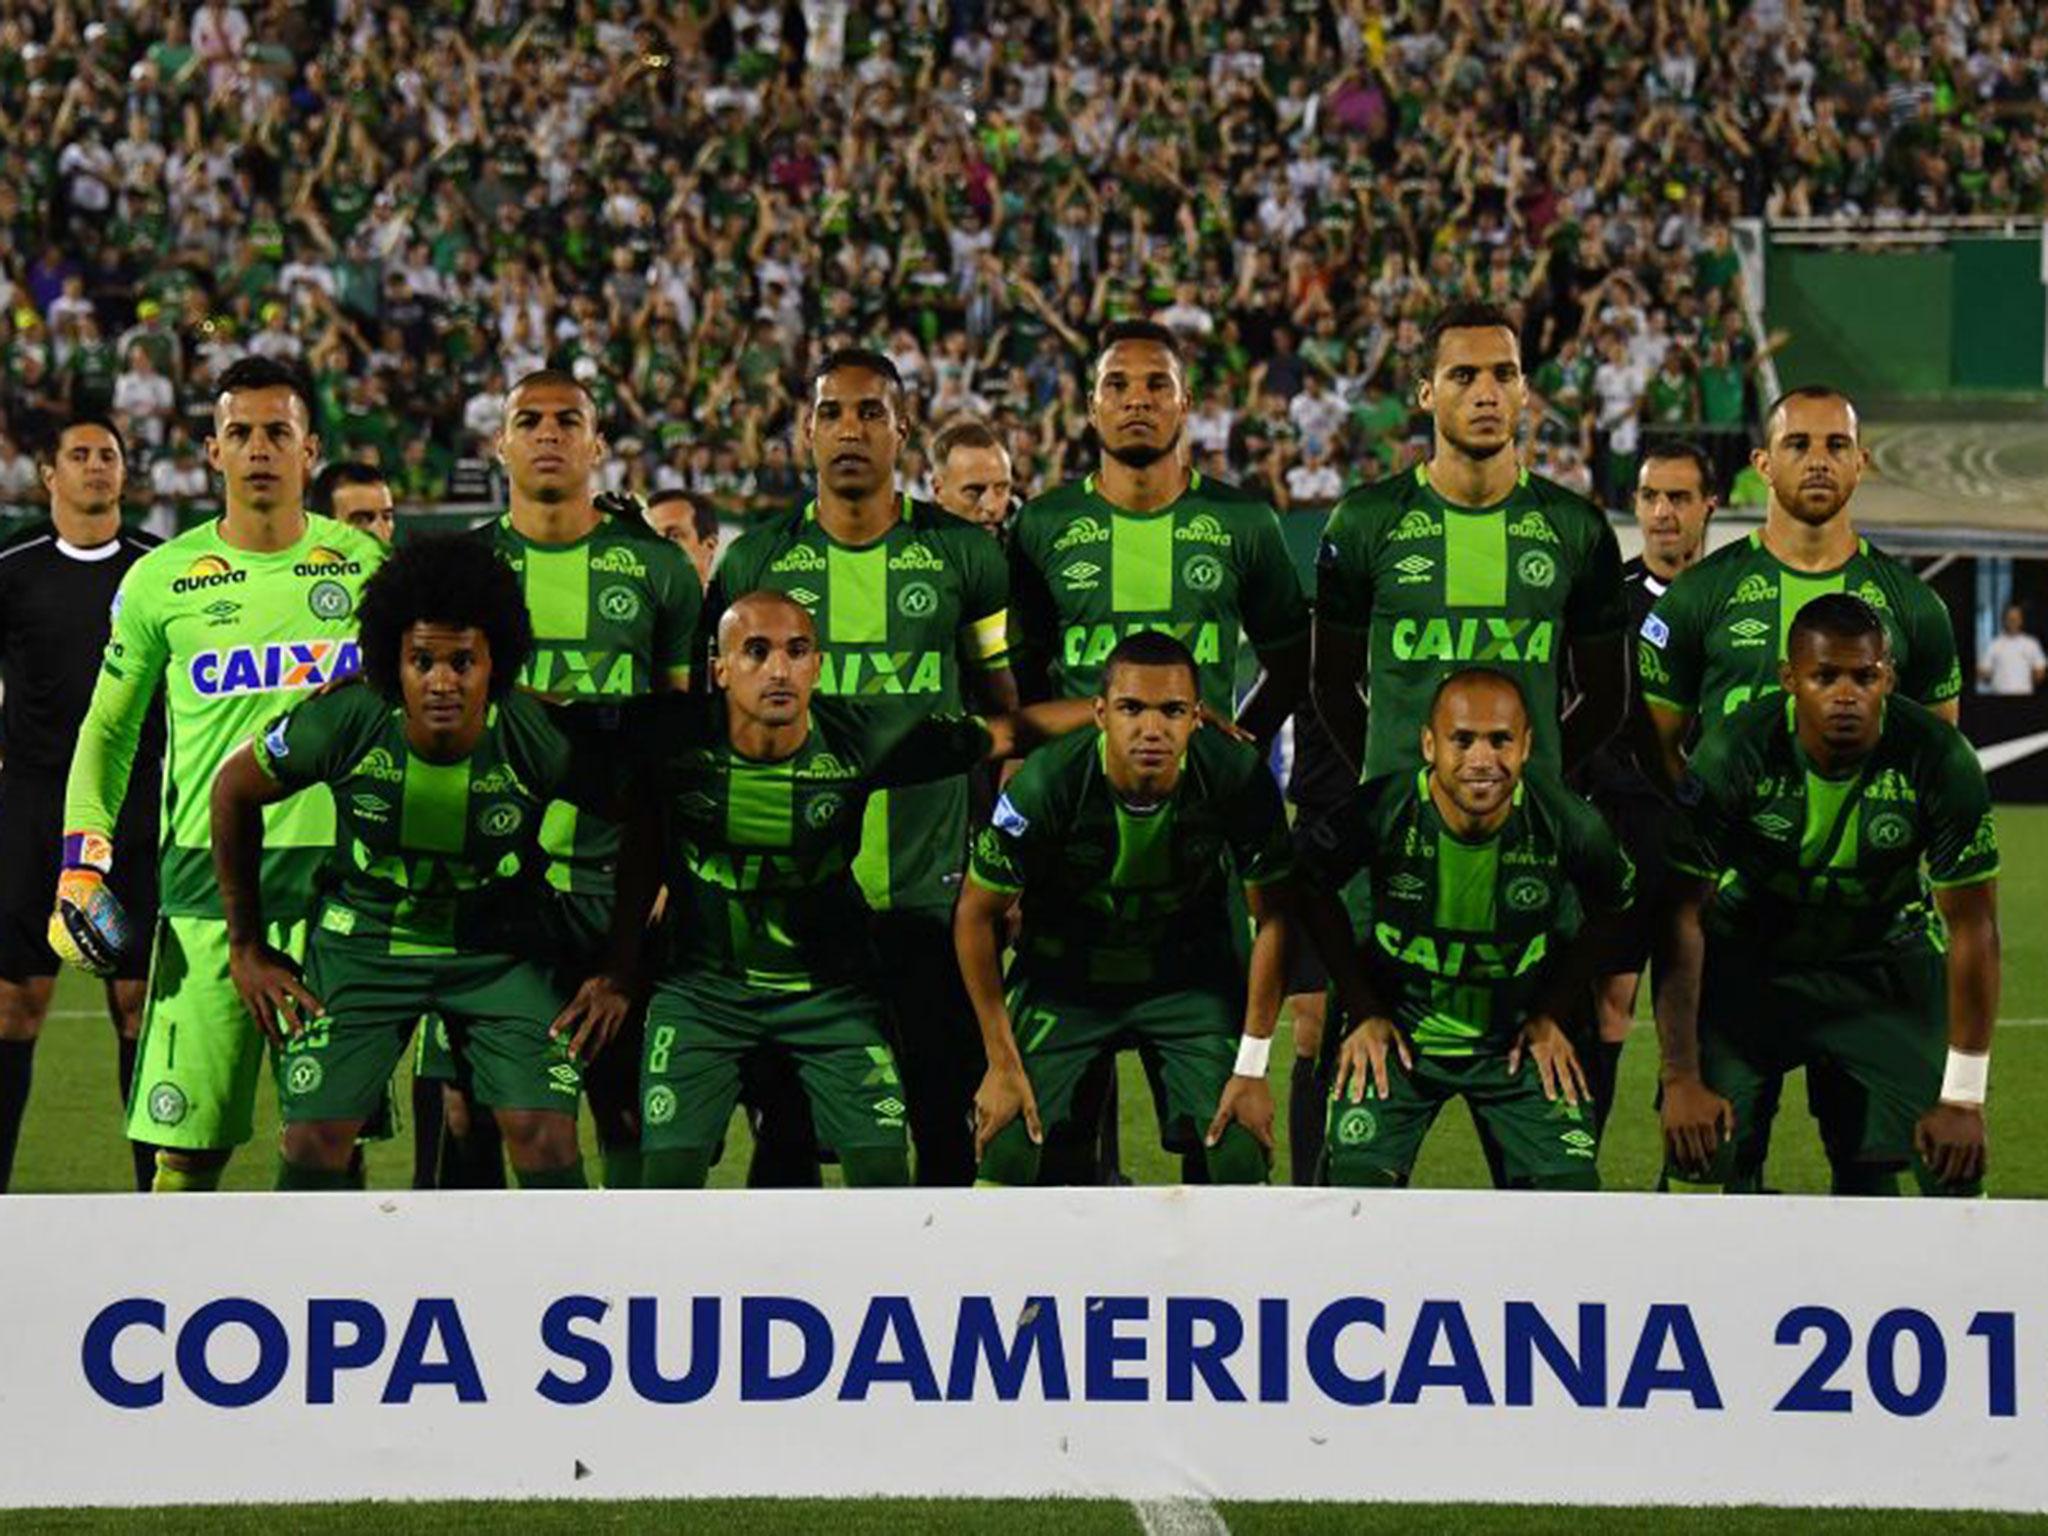 The Chapecoense squad pose for a picture ahead of their match against San Lorenzo last Wednesday